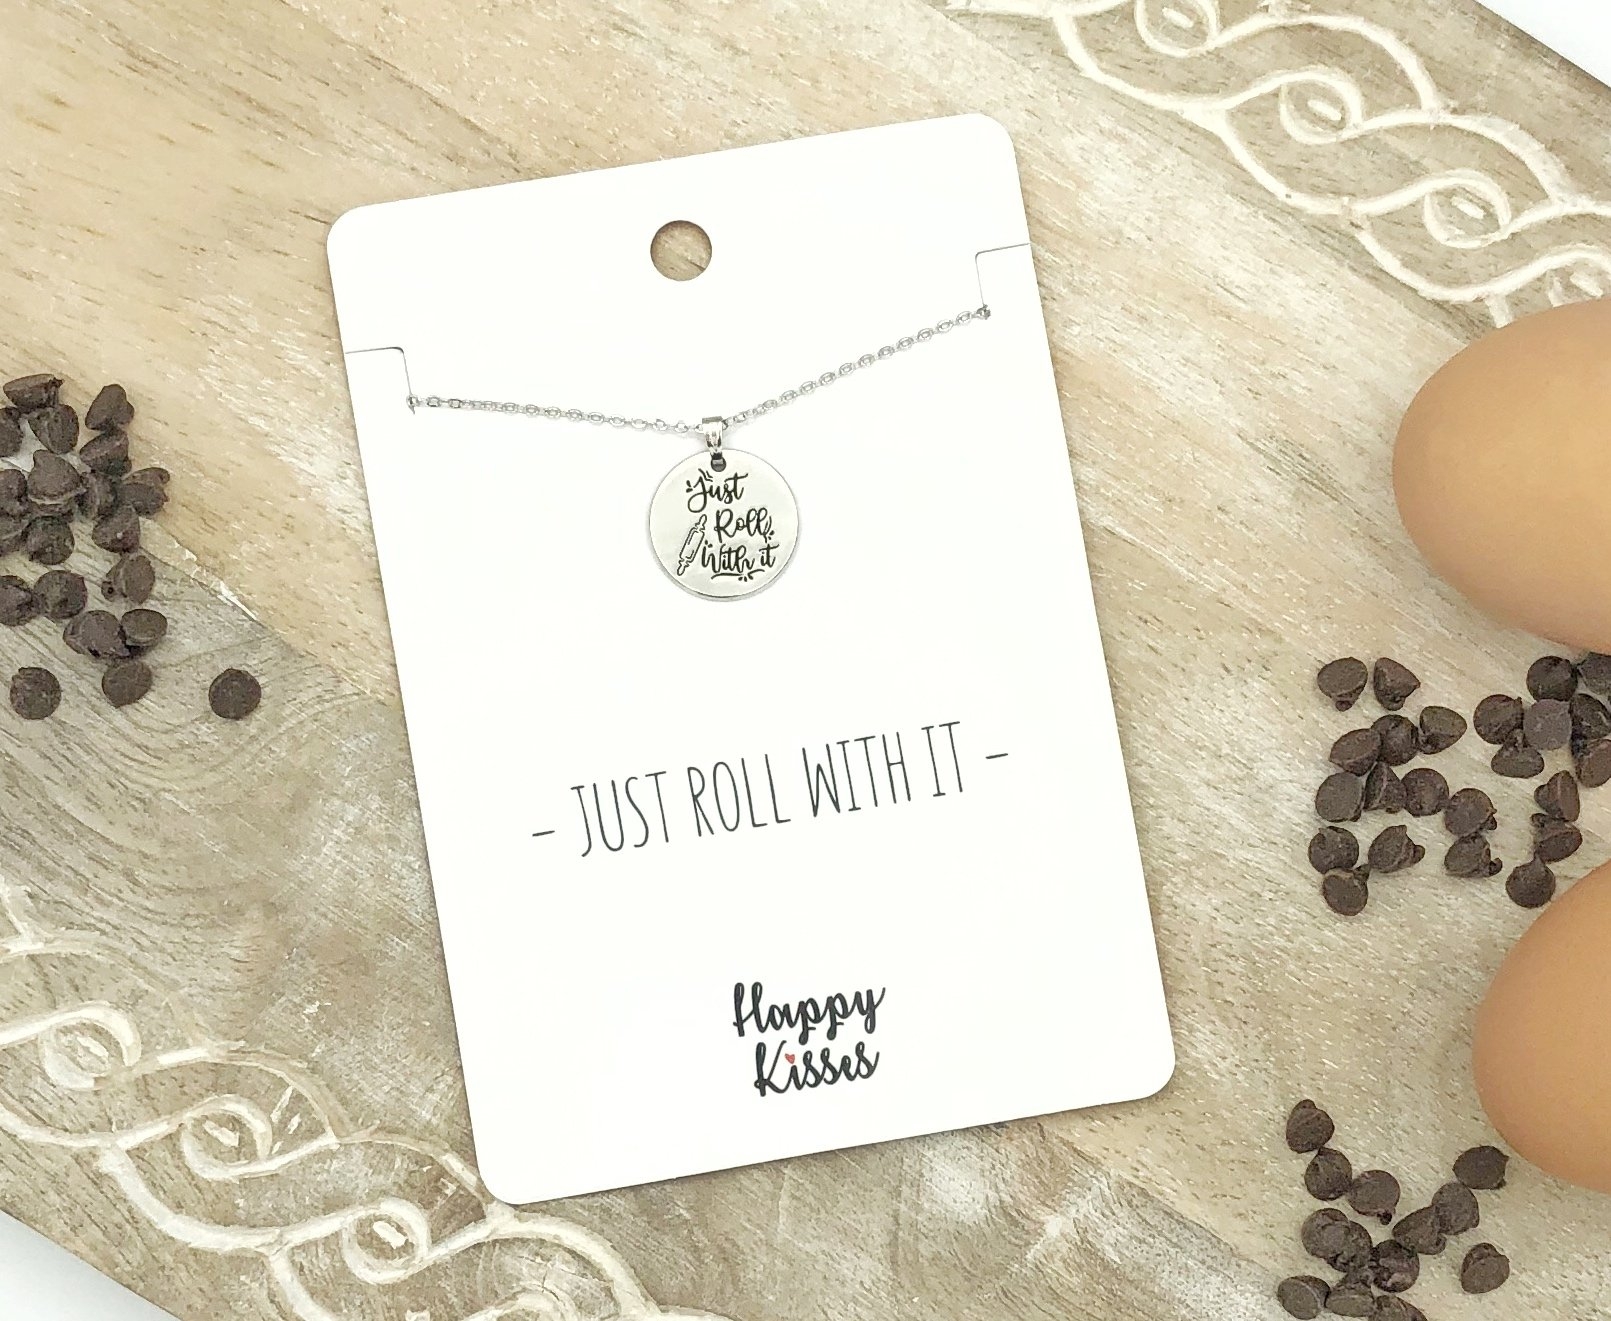 “Just Roll With It” Baking Necklace – Happy Kisses